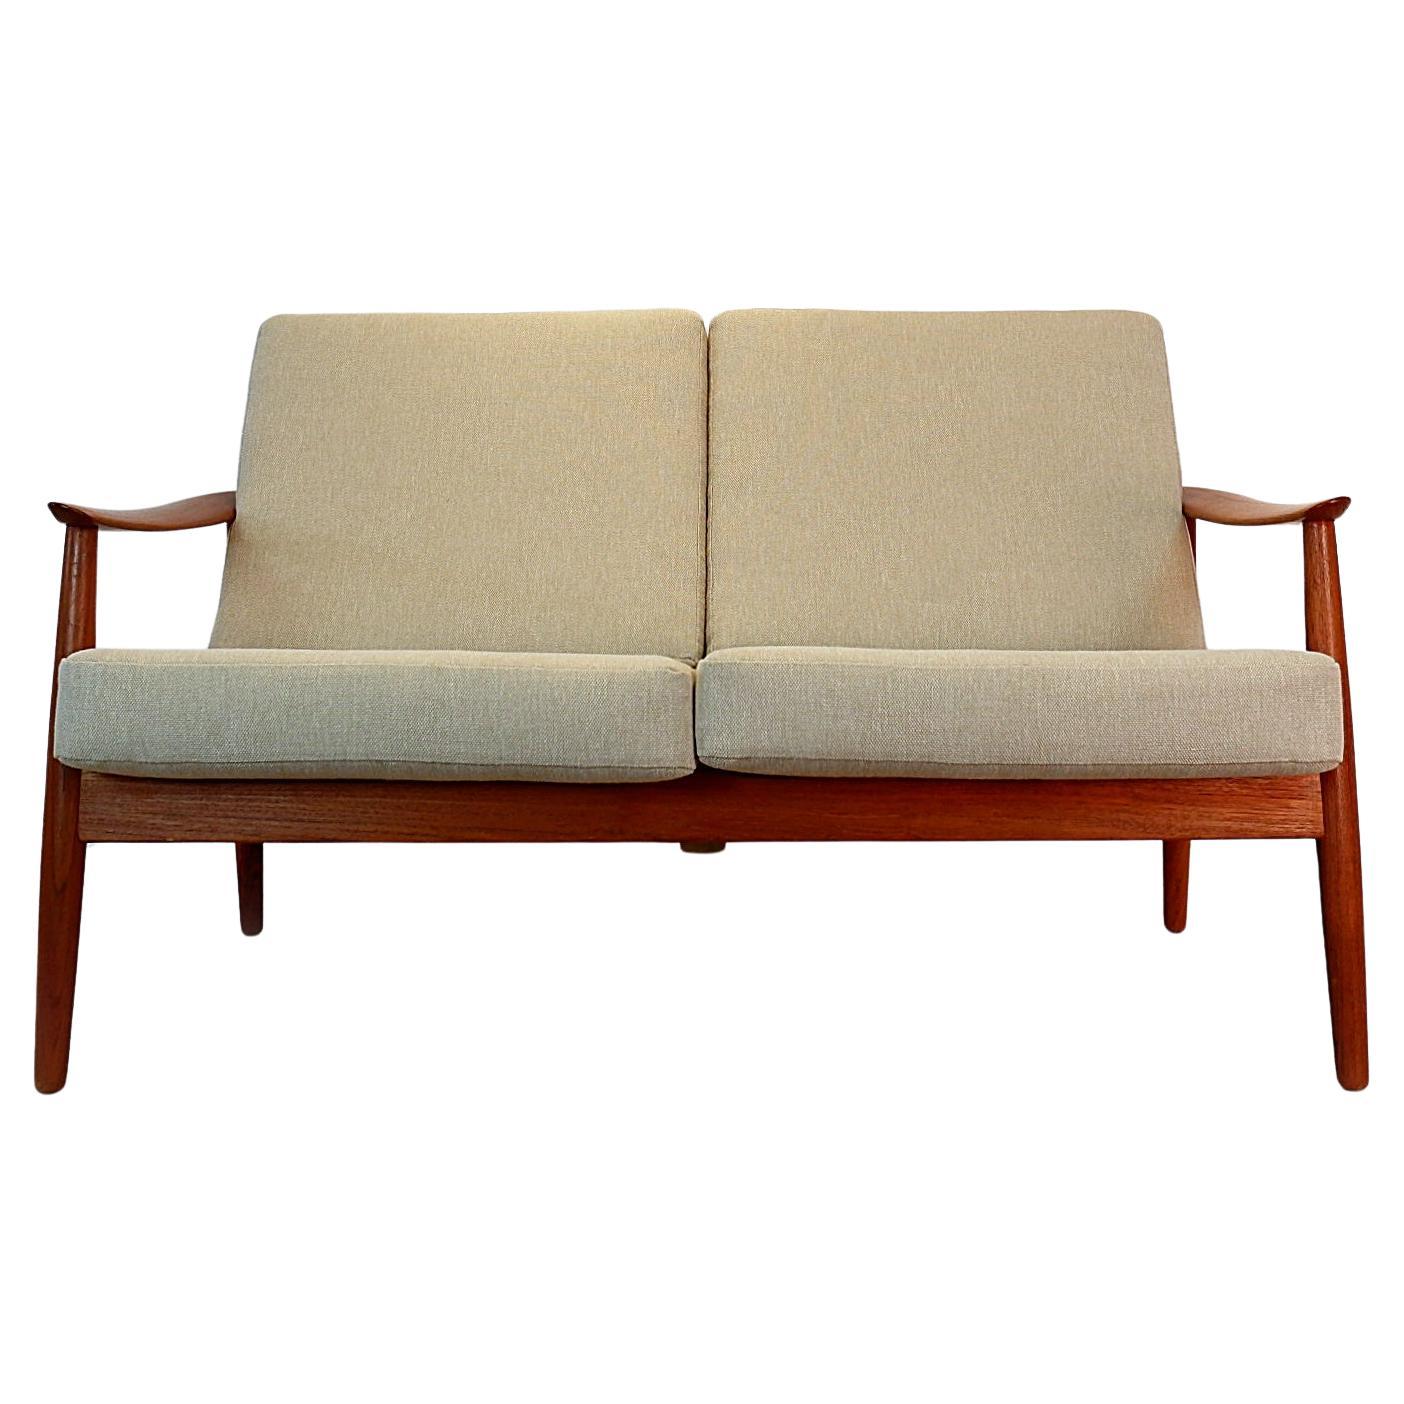 Mid Century Two-Seater Sofa Model 164 by Arne Vodder, France&Son